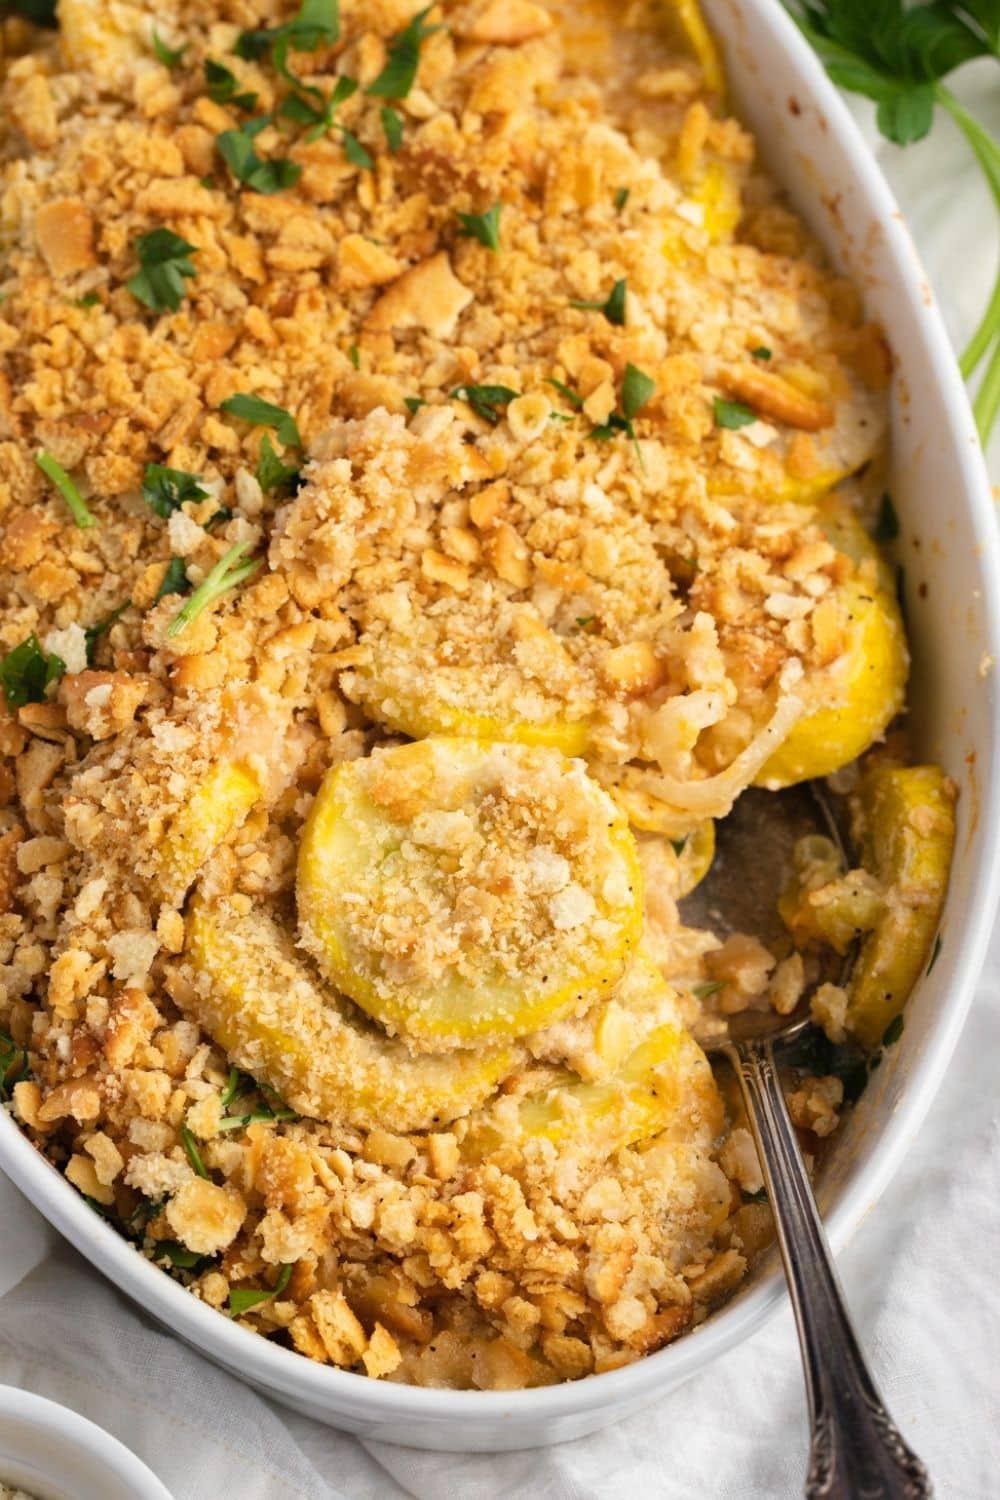 Healthy and Crumbly Squash Casserole with Herbs